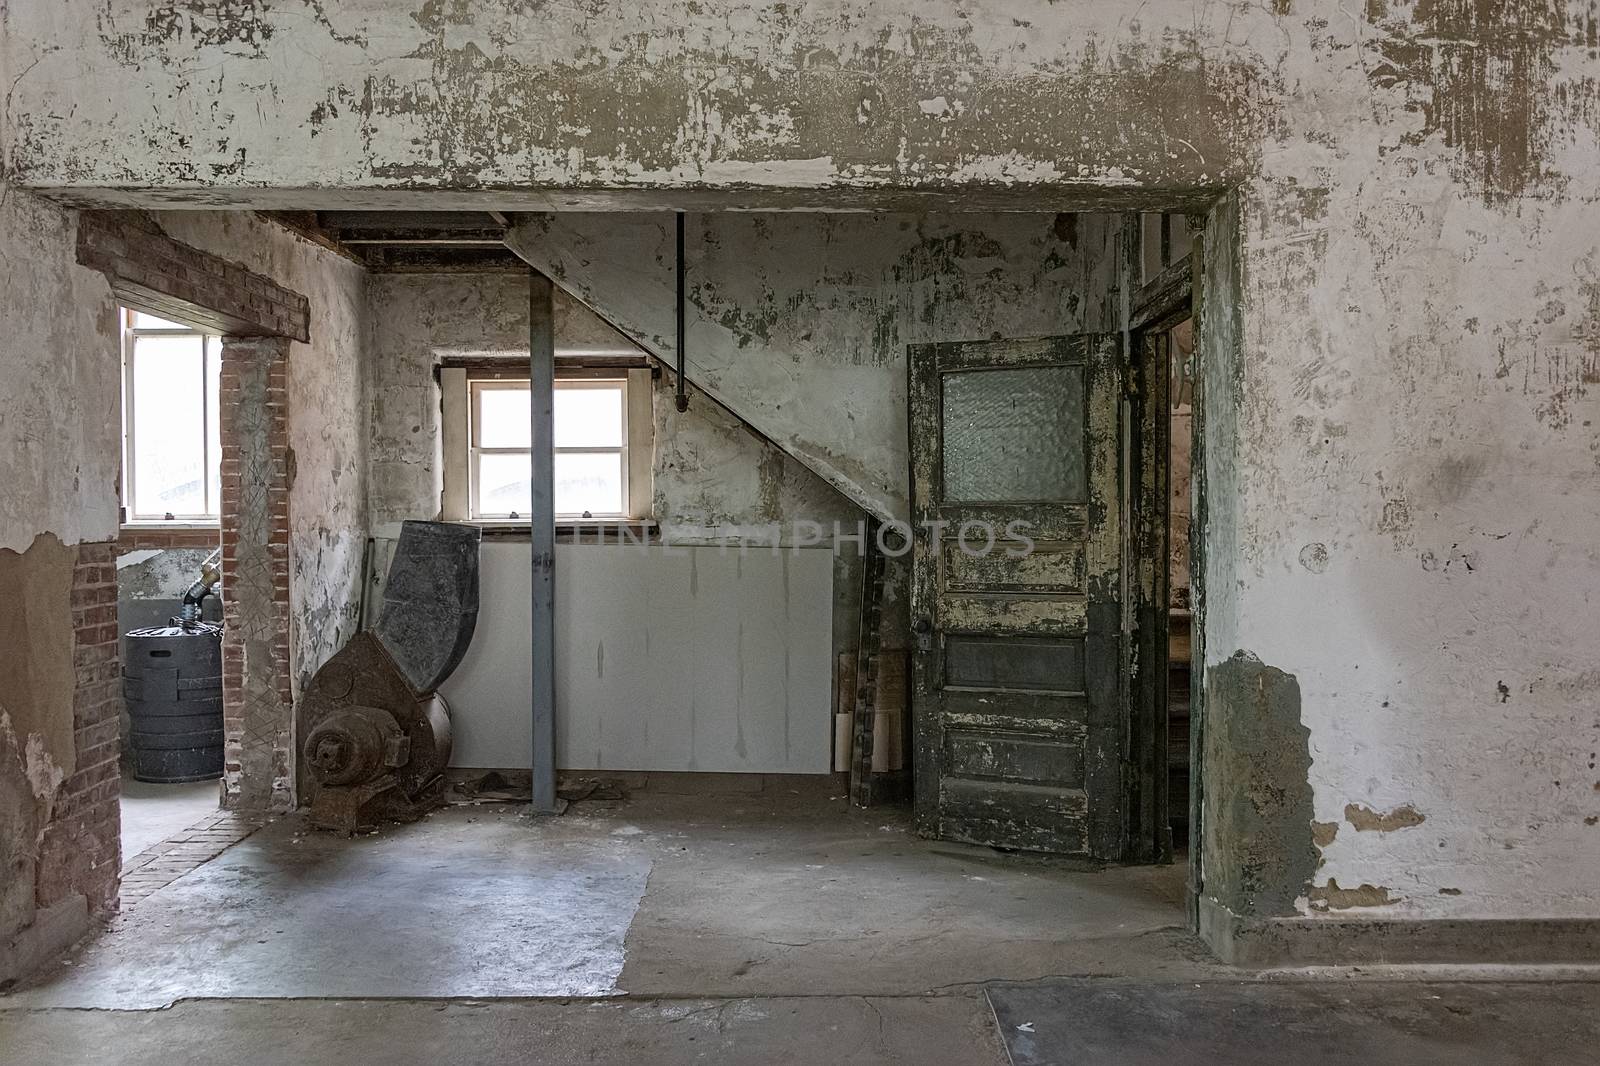 USA, New York, Ellis Island - May 2019: Laundry in state of arrested deterioration, works courtesy of 'Save Ellis Island'